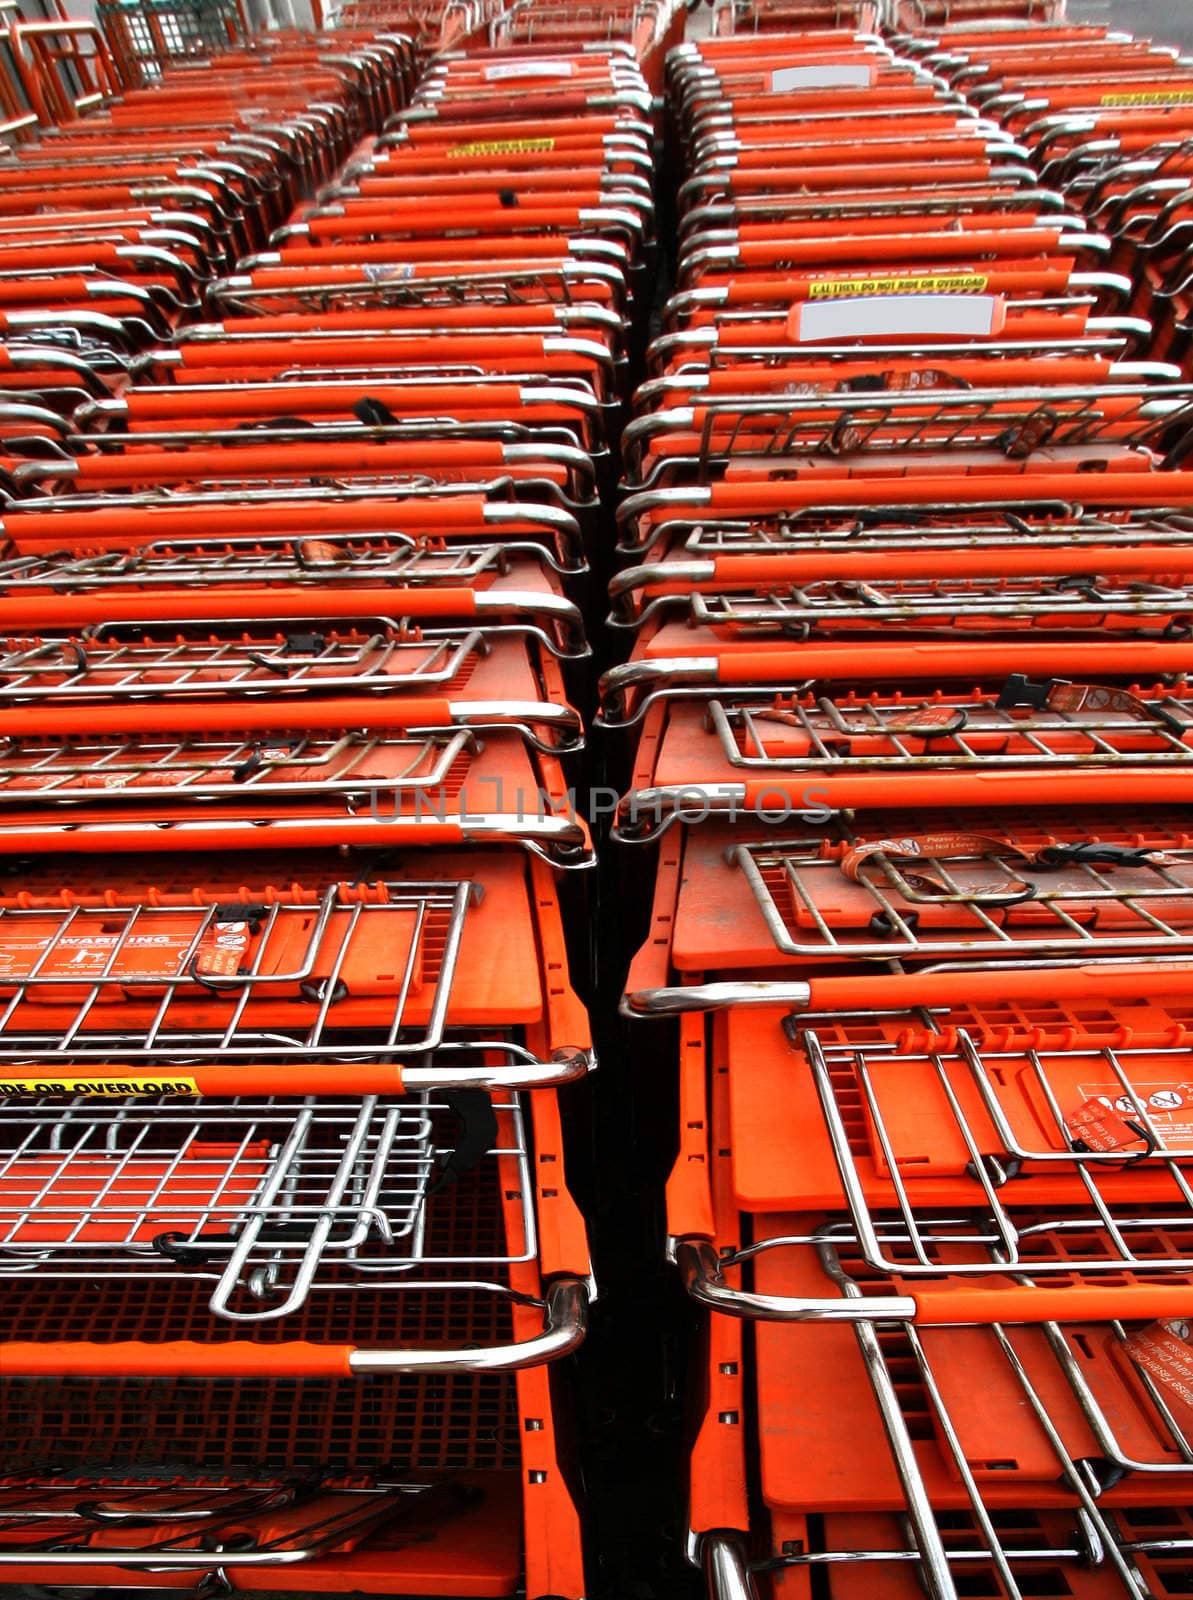 Lines of shopping carts at a retailer